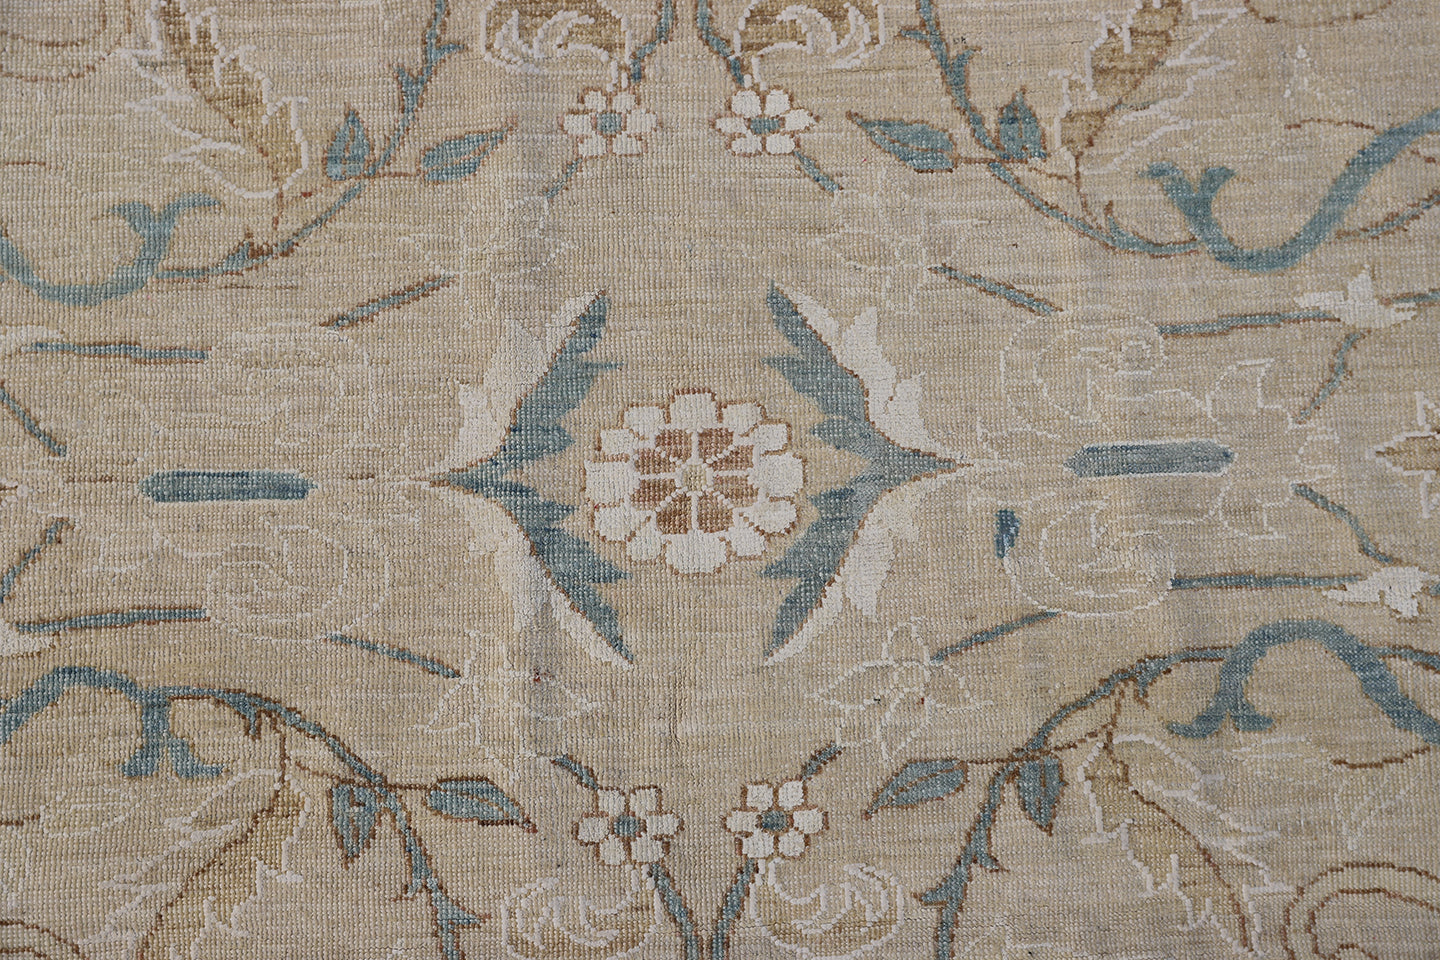 12'x16' Polonaise Design Wool, Cotton and Silk Ariana Luxury Collection Rug